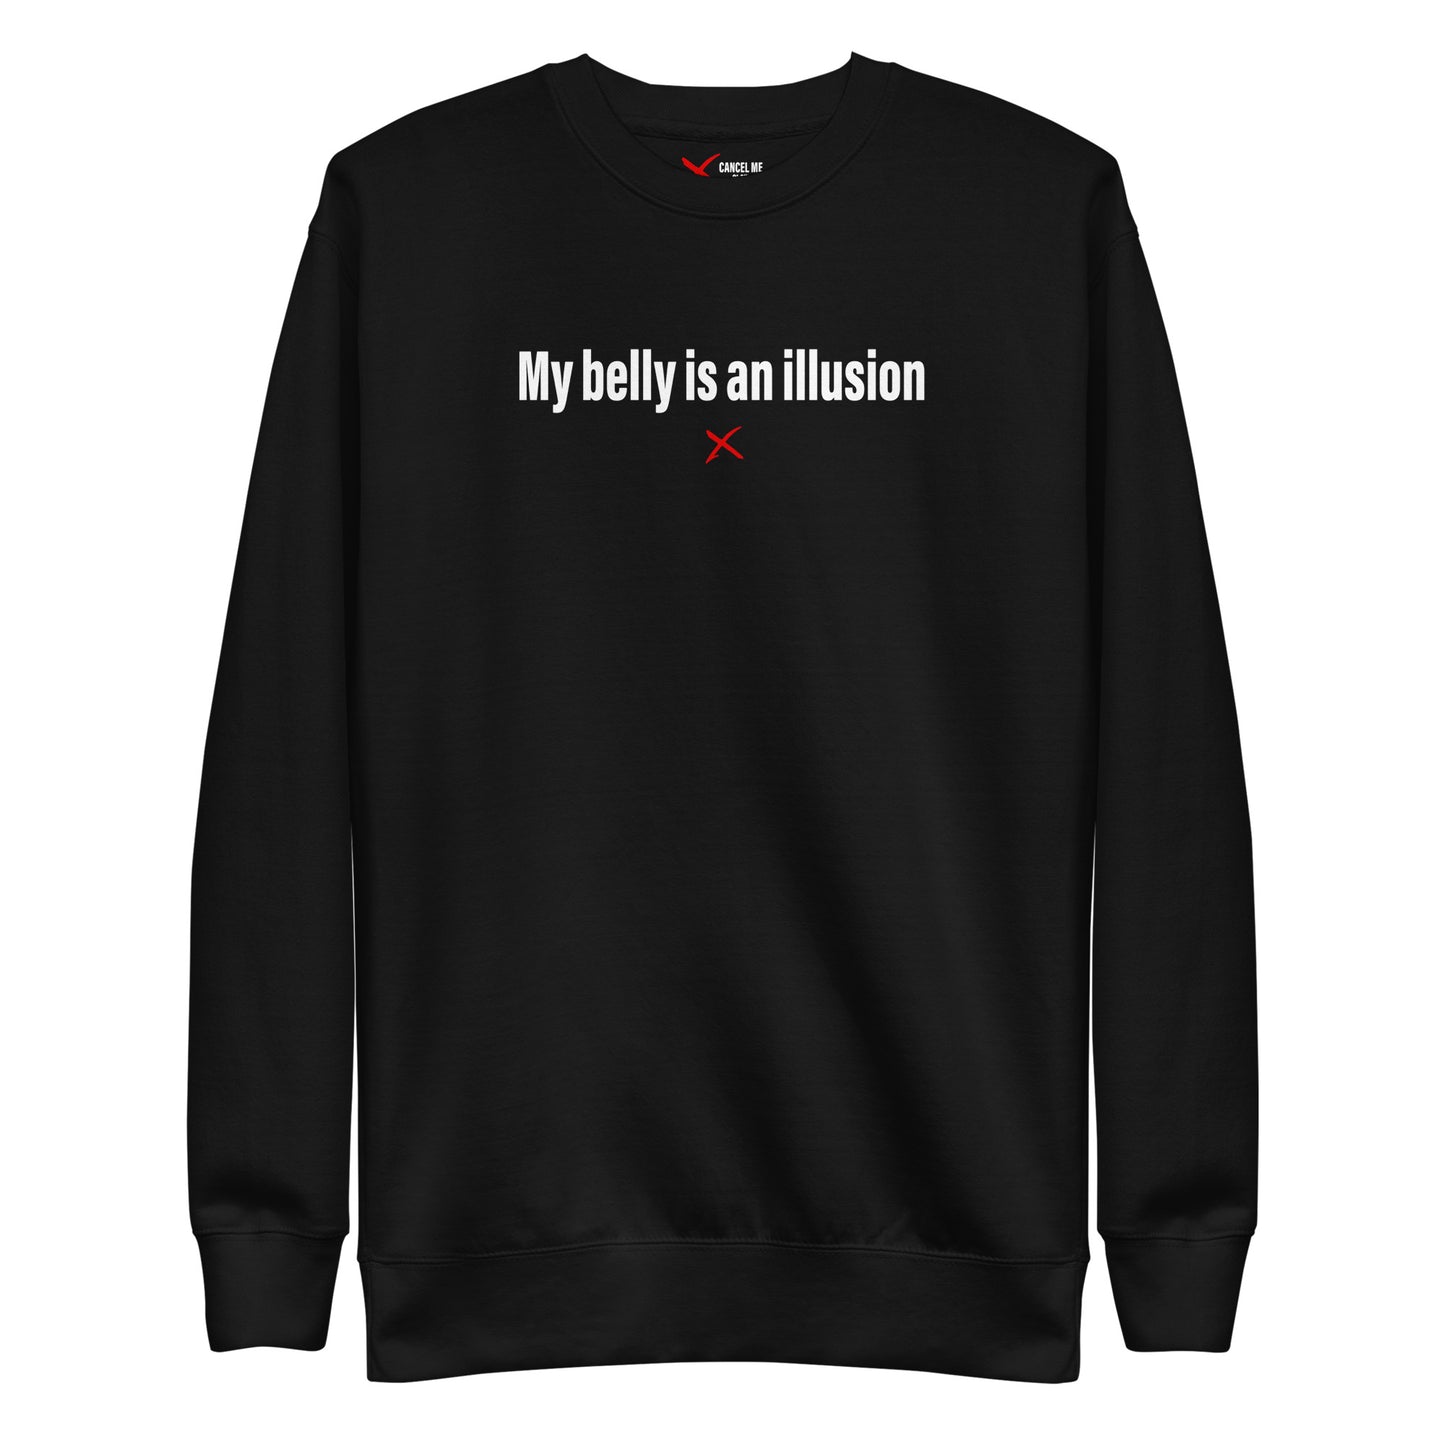 My belly is an illusion - Sweatshirt